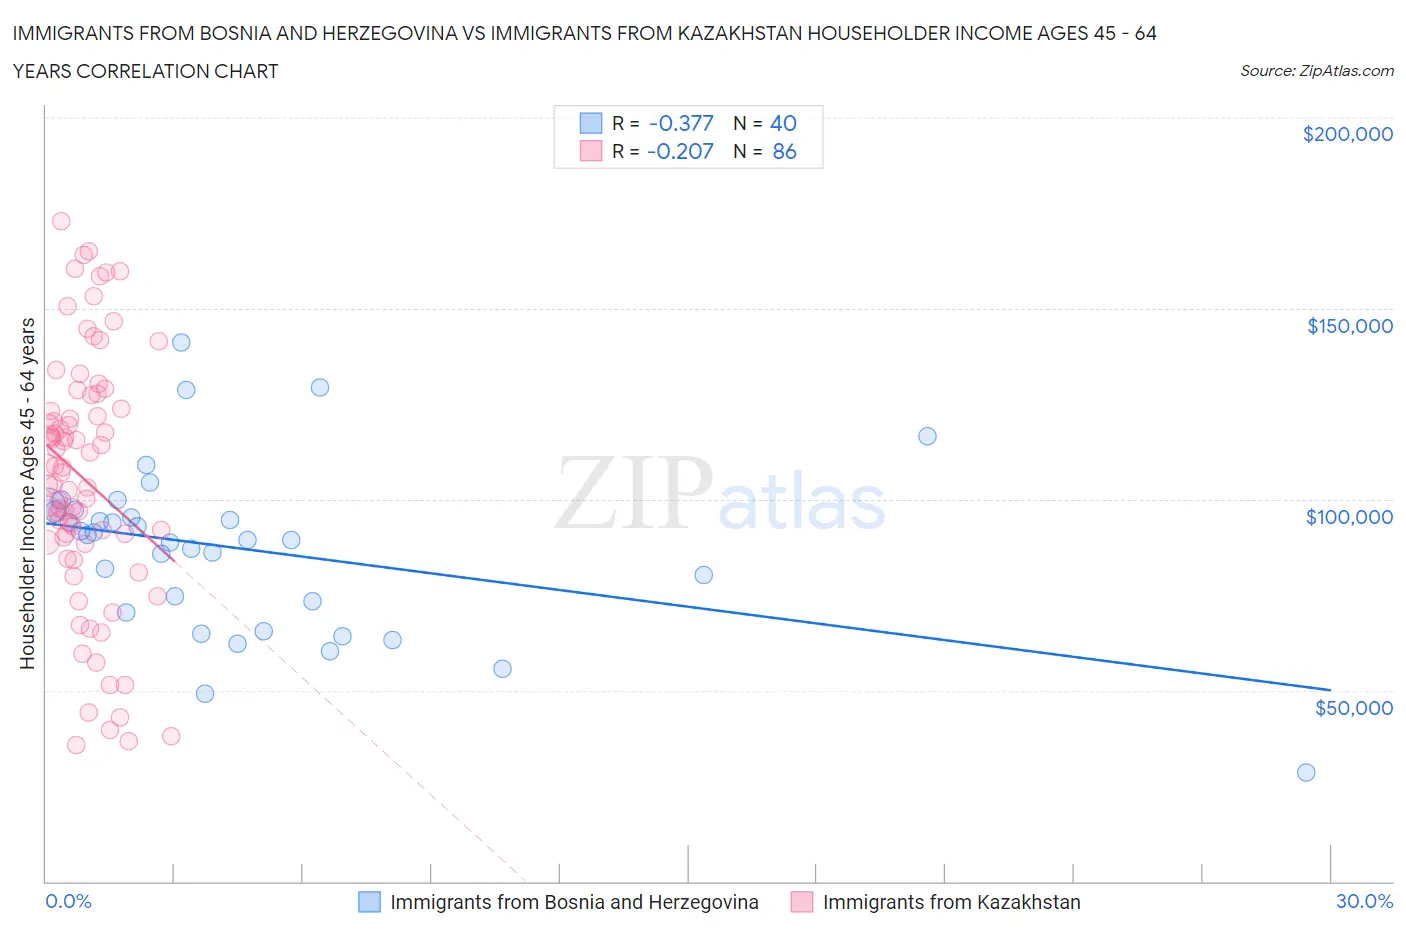 Immigrants from Bosnia and Herzegovina vs Immigrants from Kazakhstan Householder Income Ages 45 - 64 years